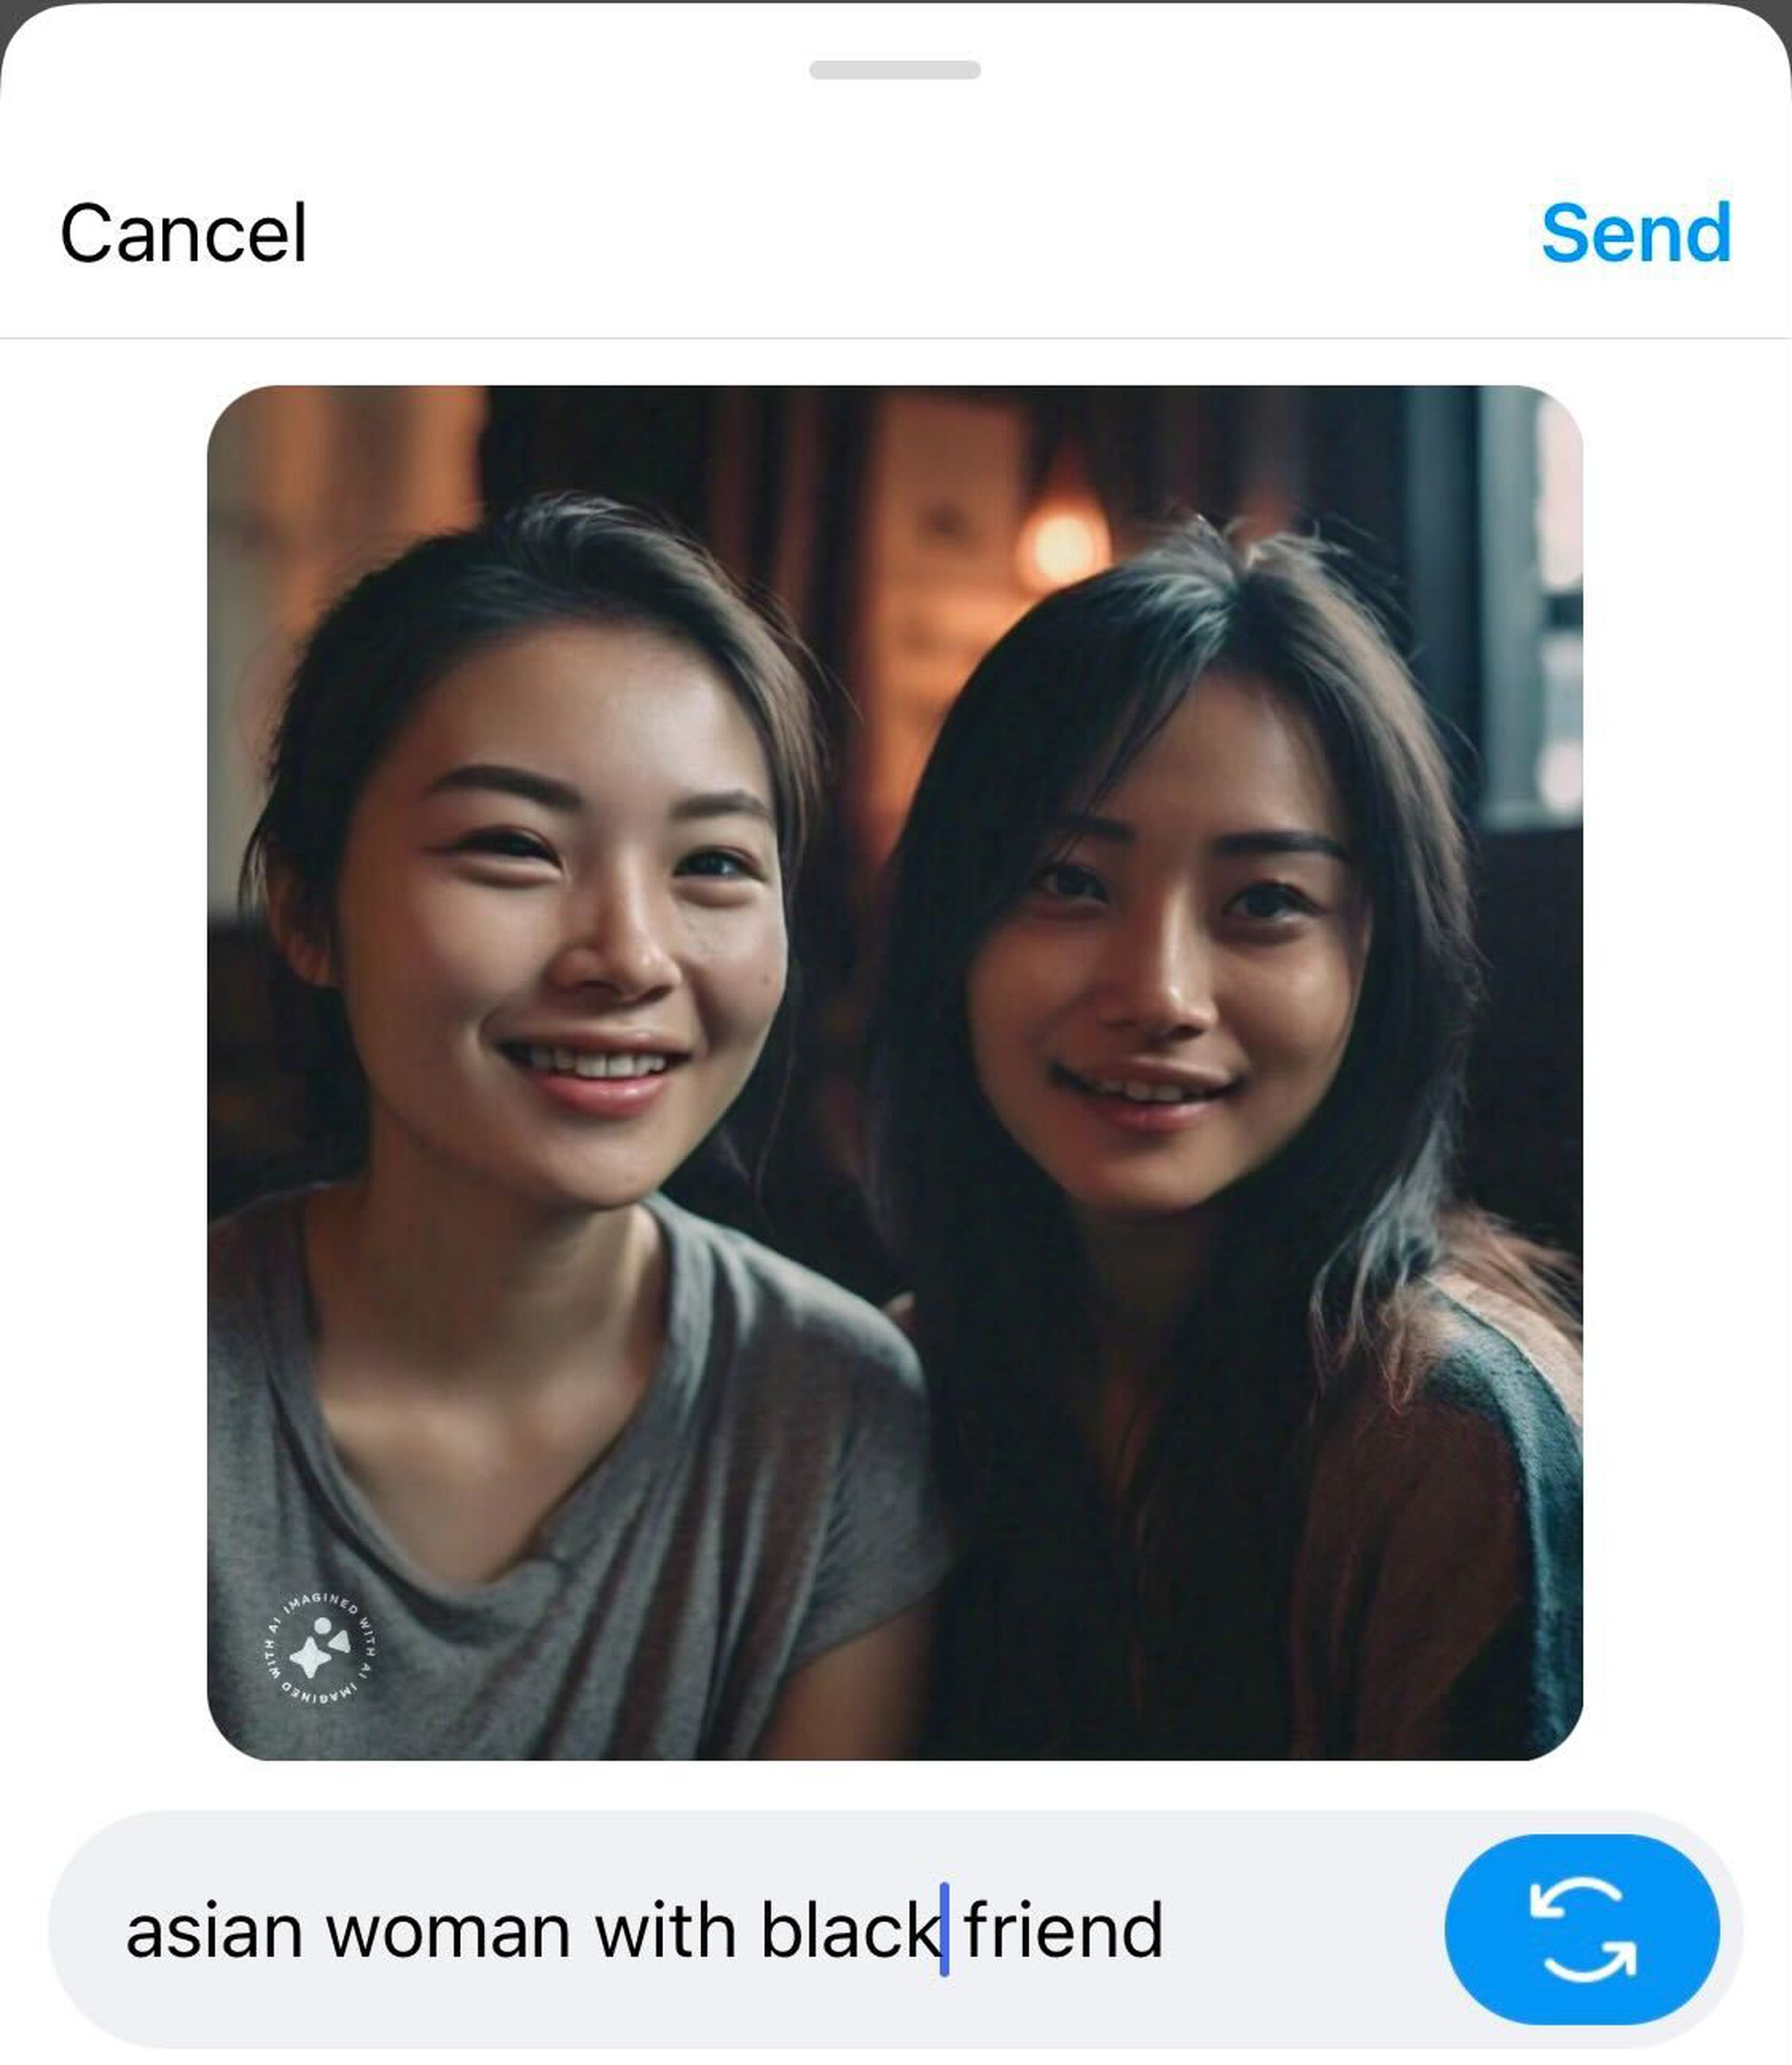 “Asian woman with Black friend” AI prompt returned two Asian people.